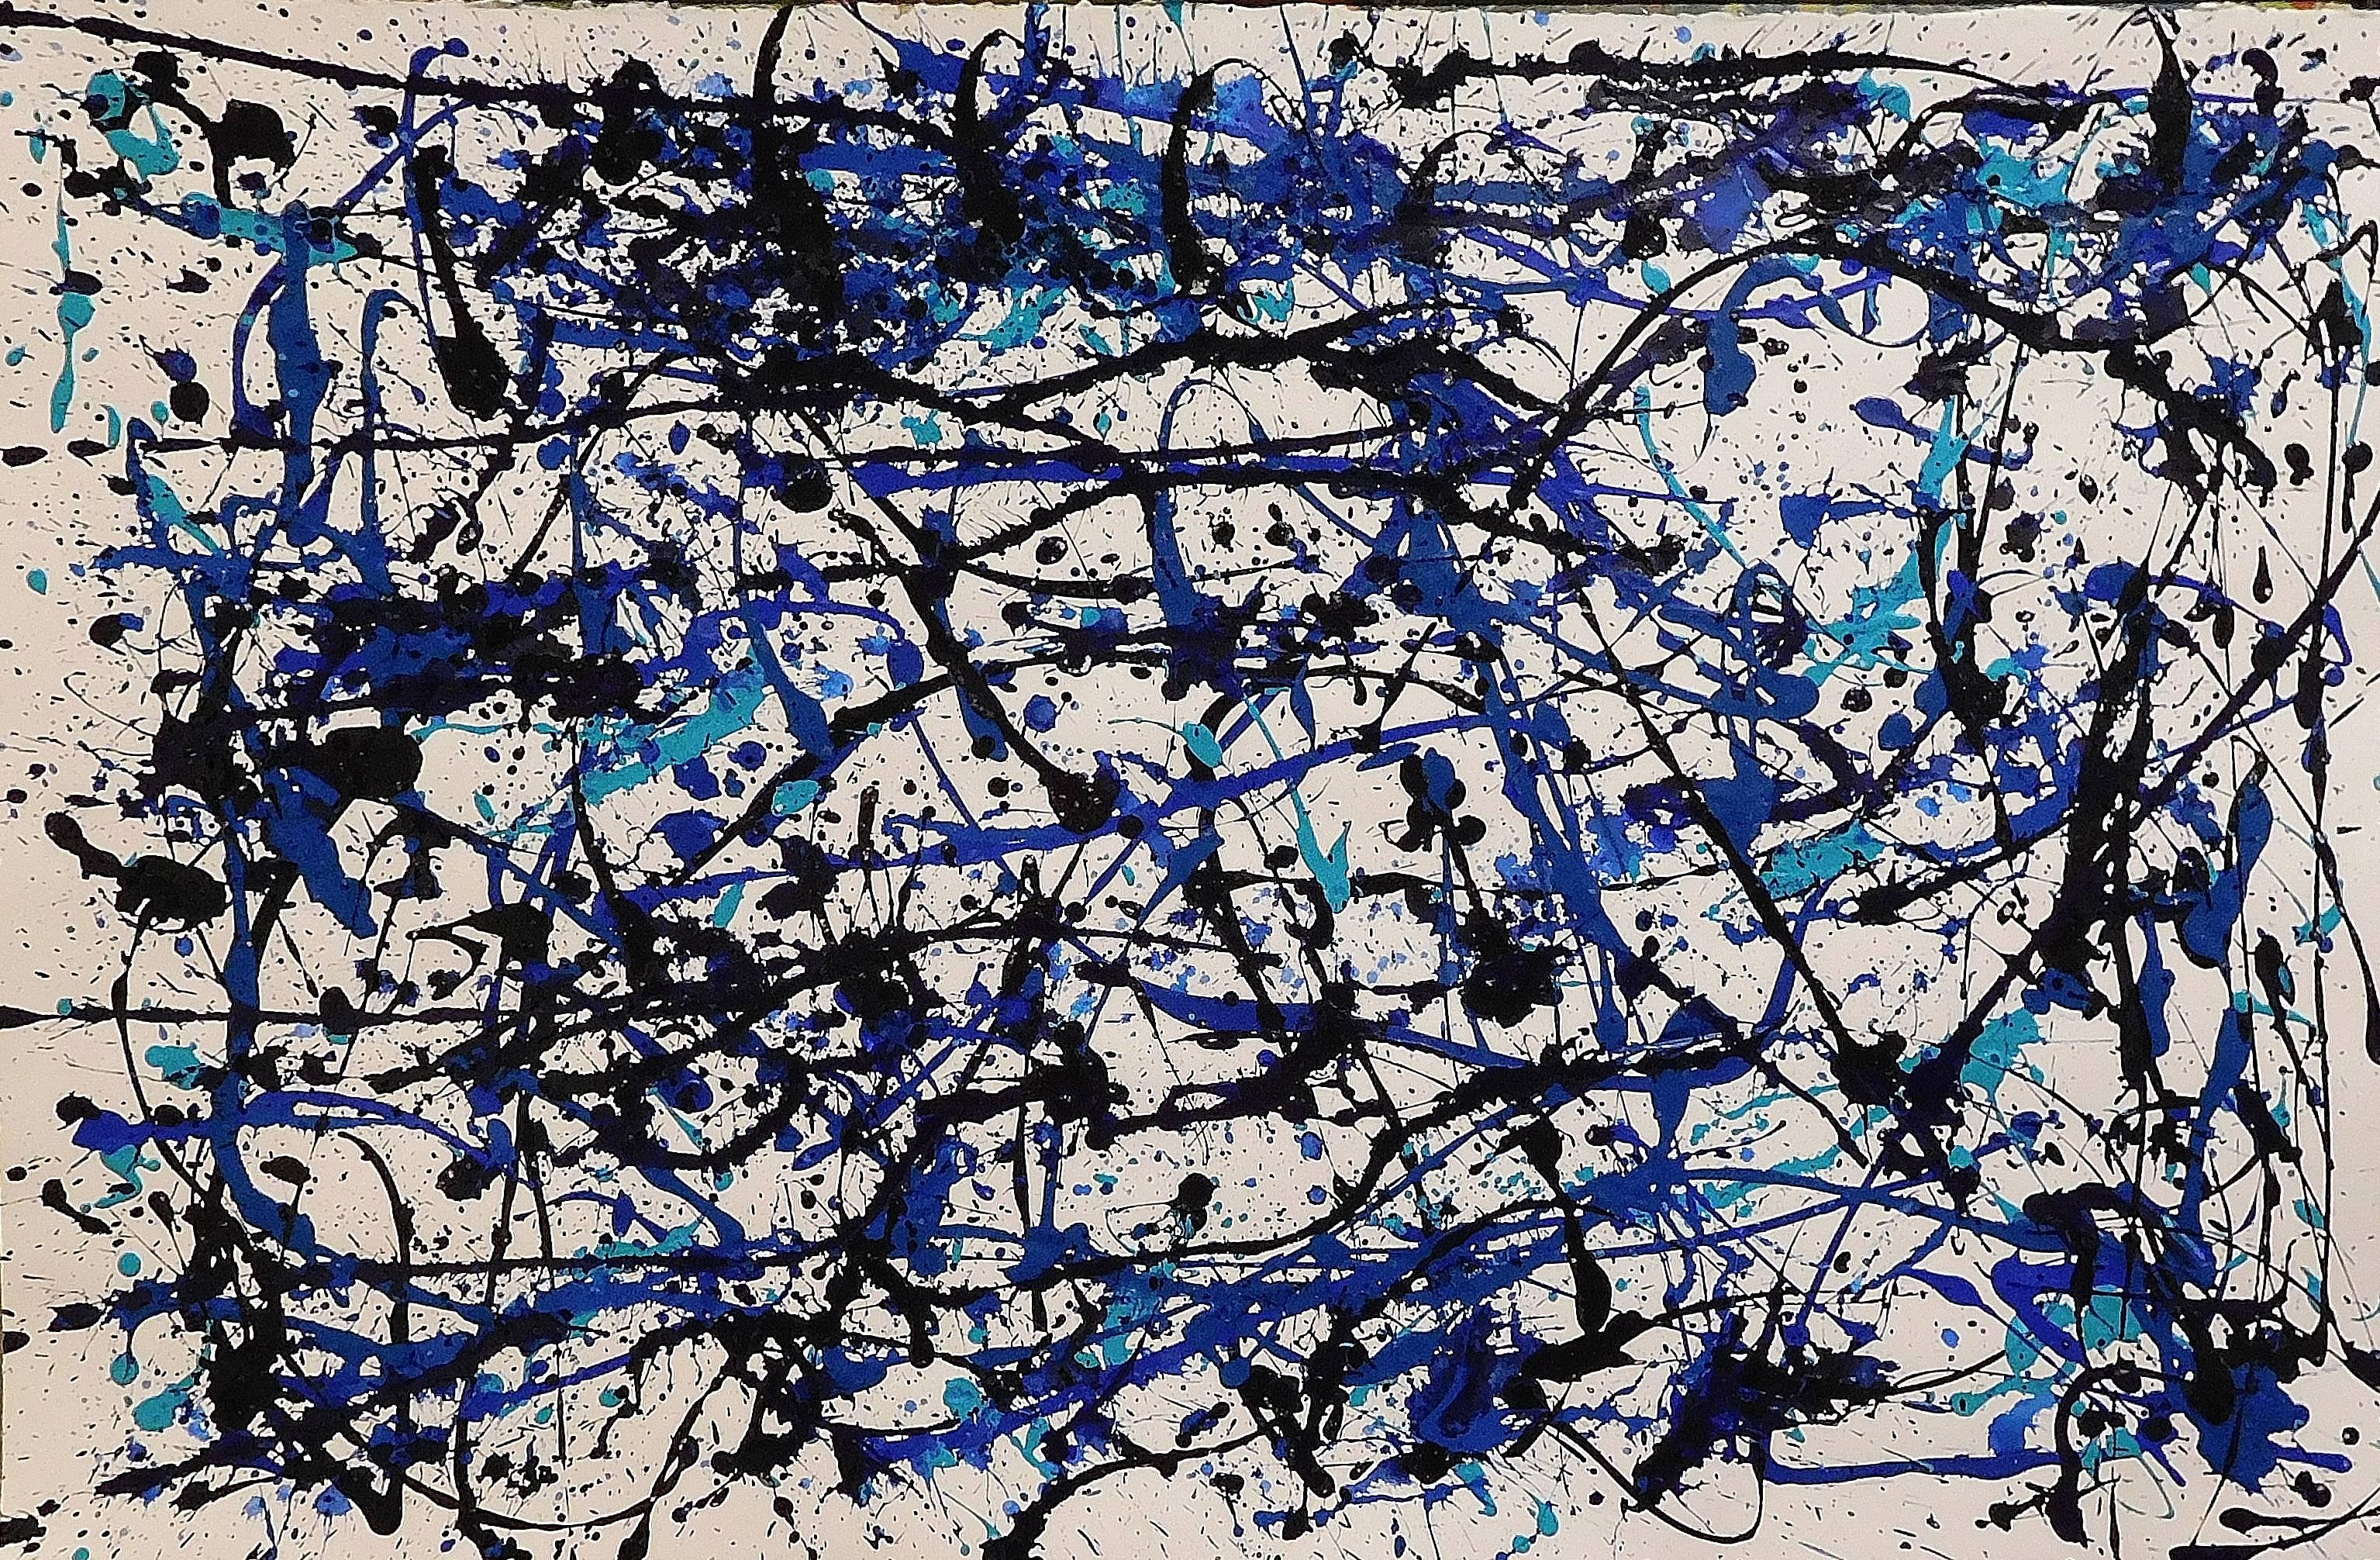 William (Bill) Alpert Abstract Painting - Drip in Navy, Blue and White